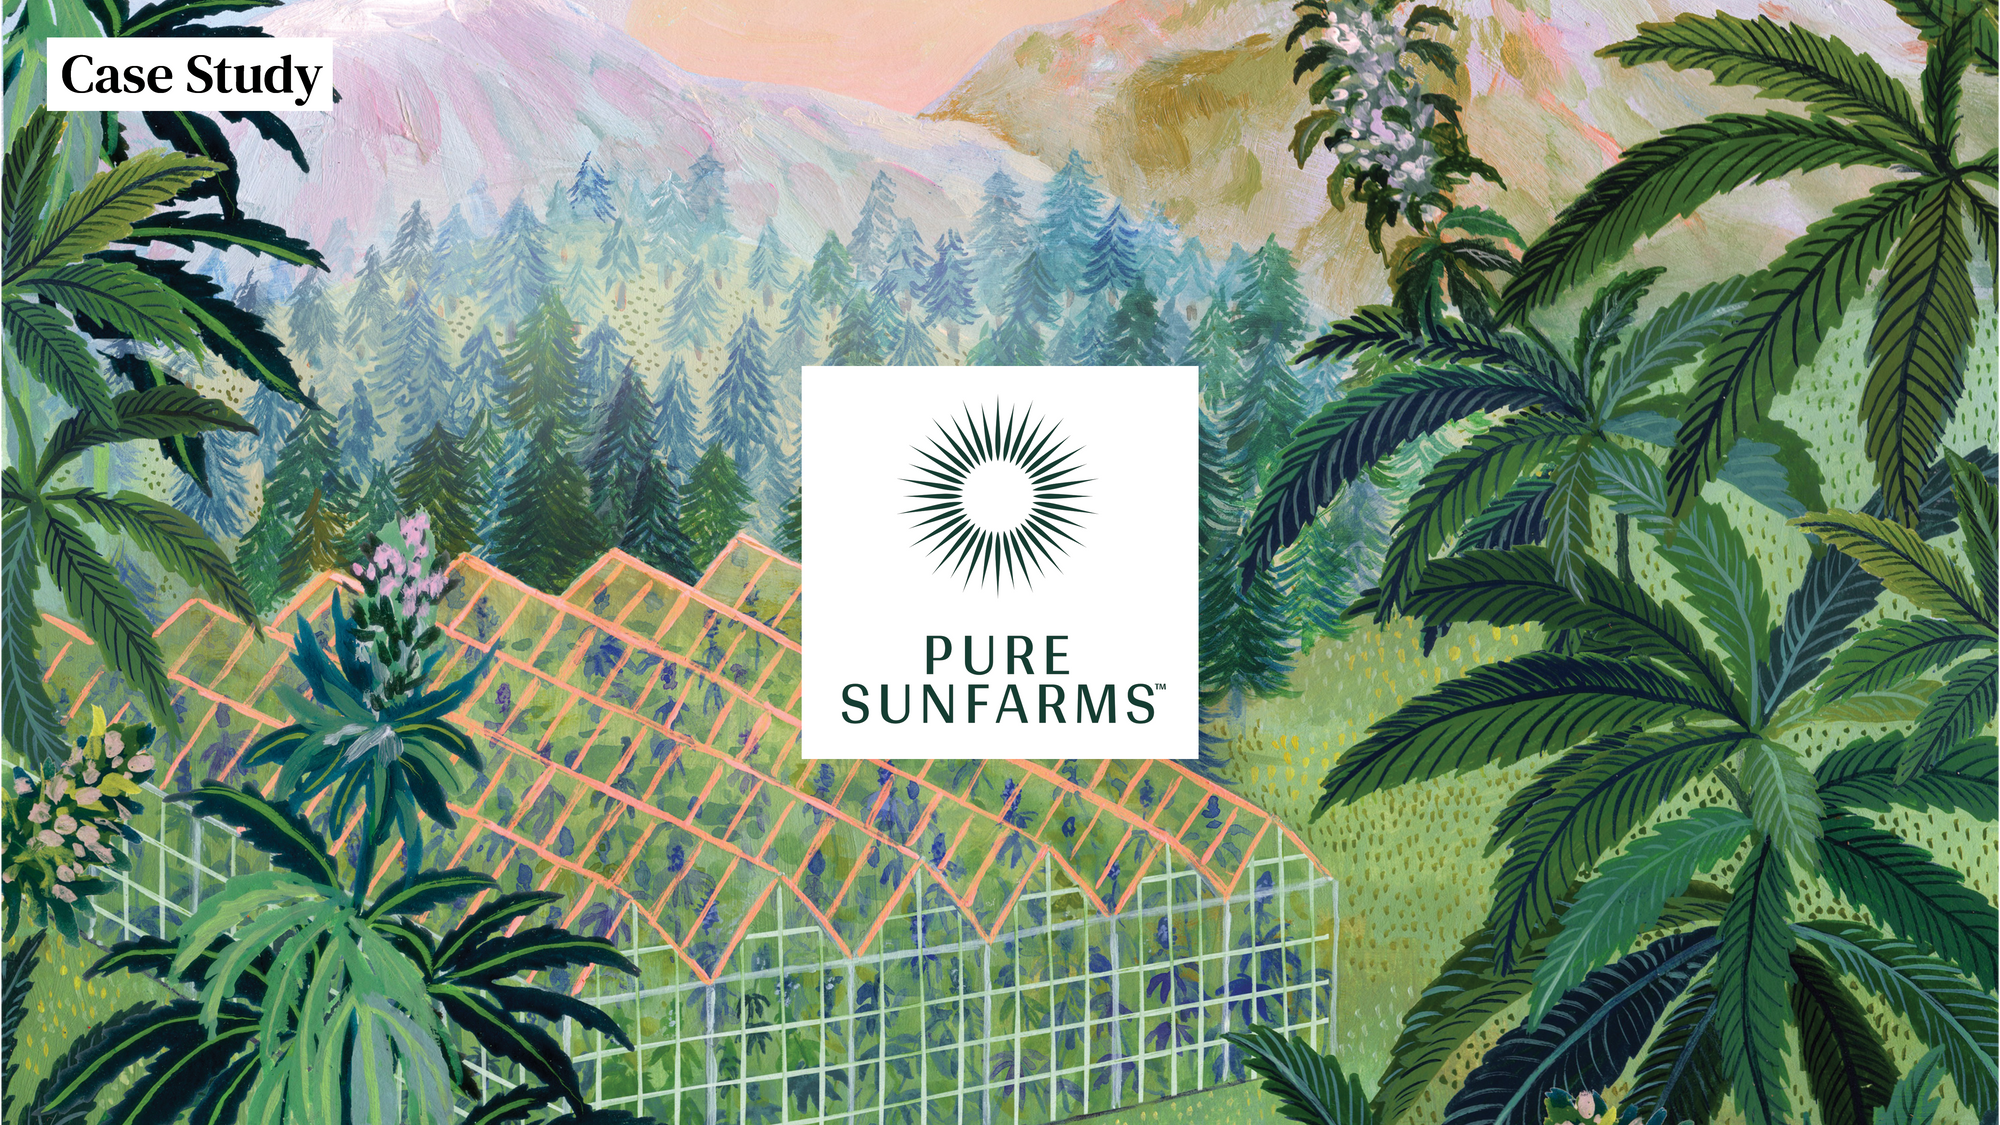 Case Study: Partnering with Pure Sunfarms to support efficiency, productivity & future growth